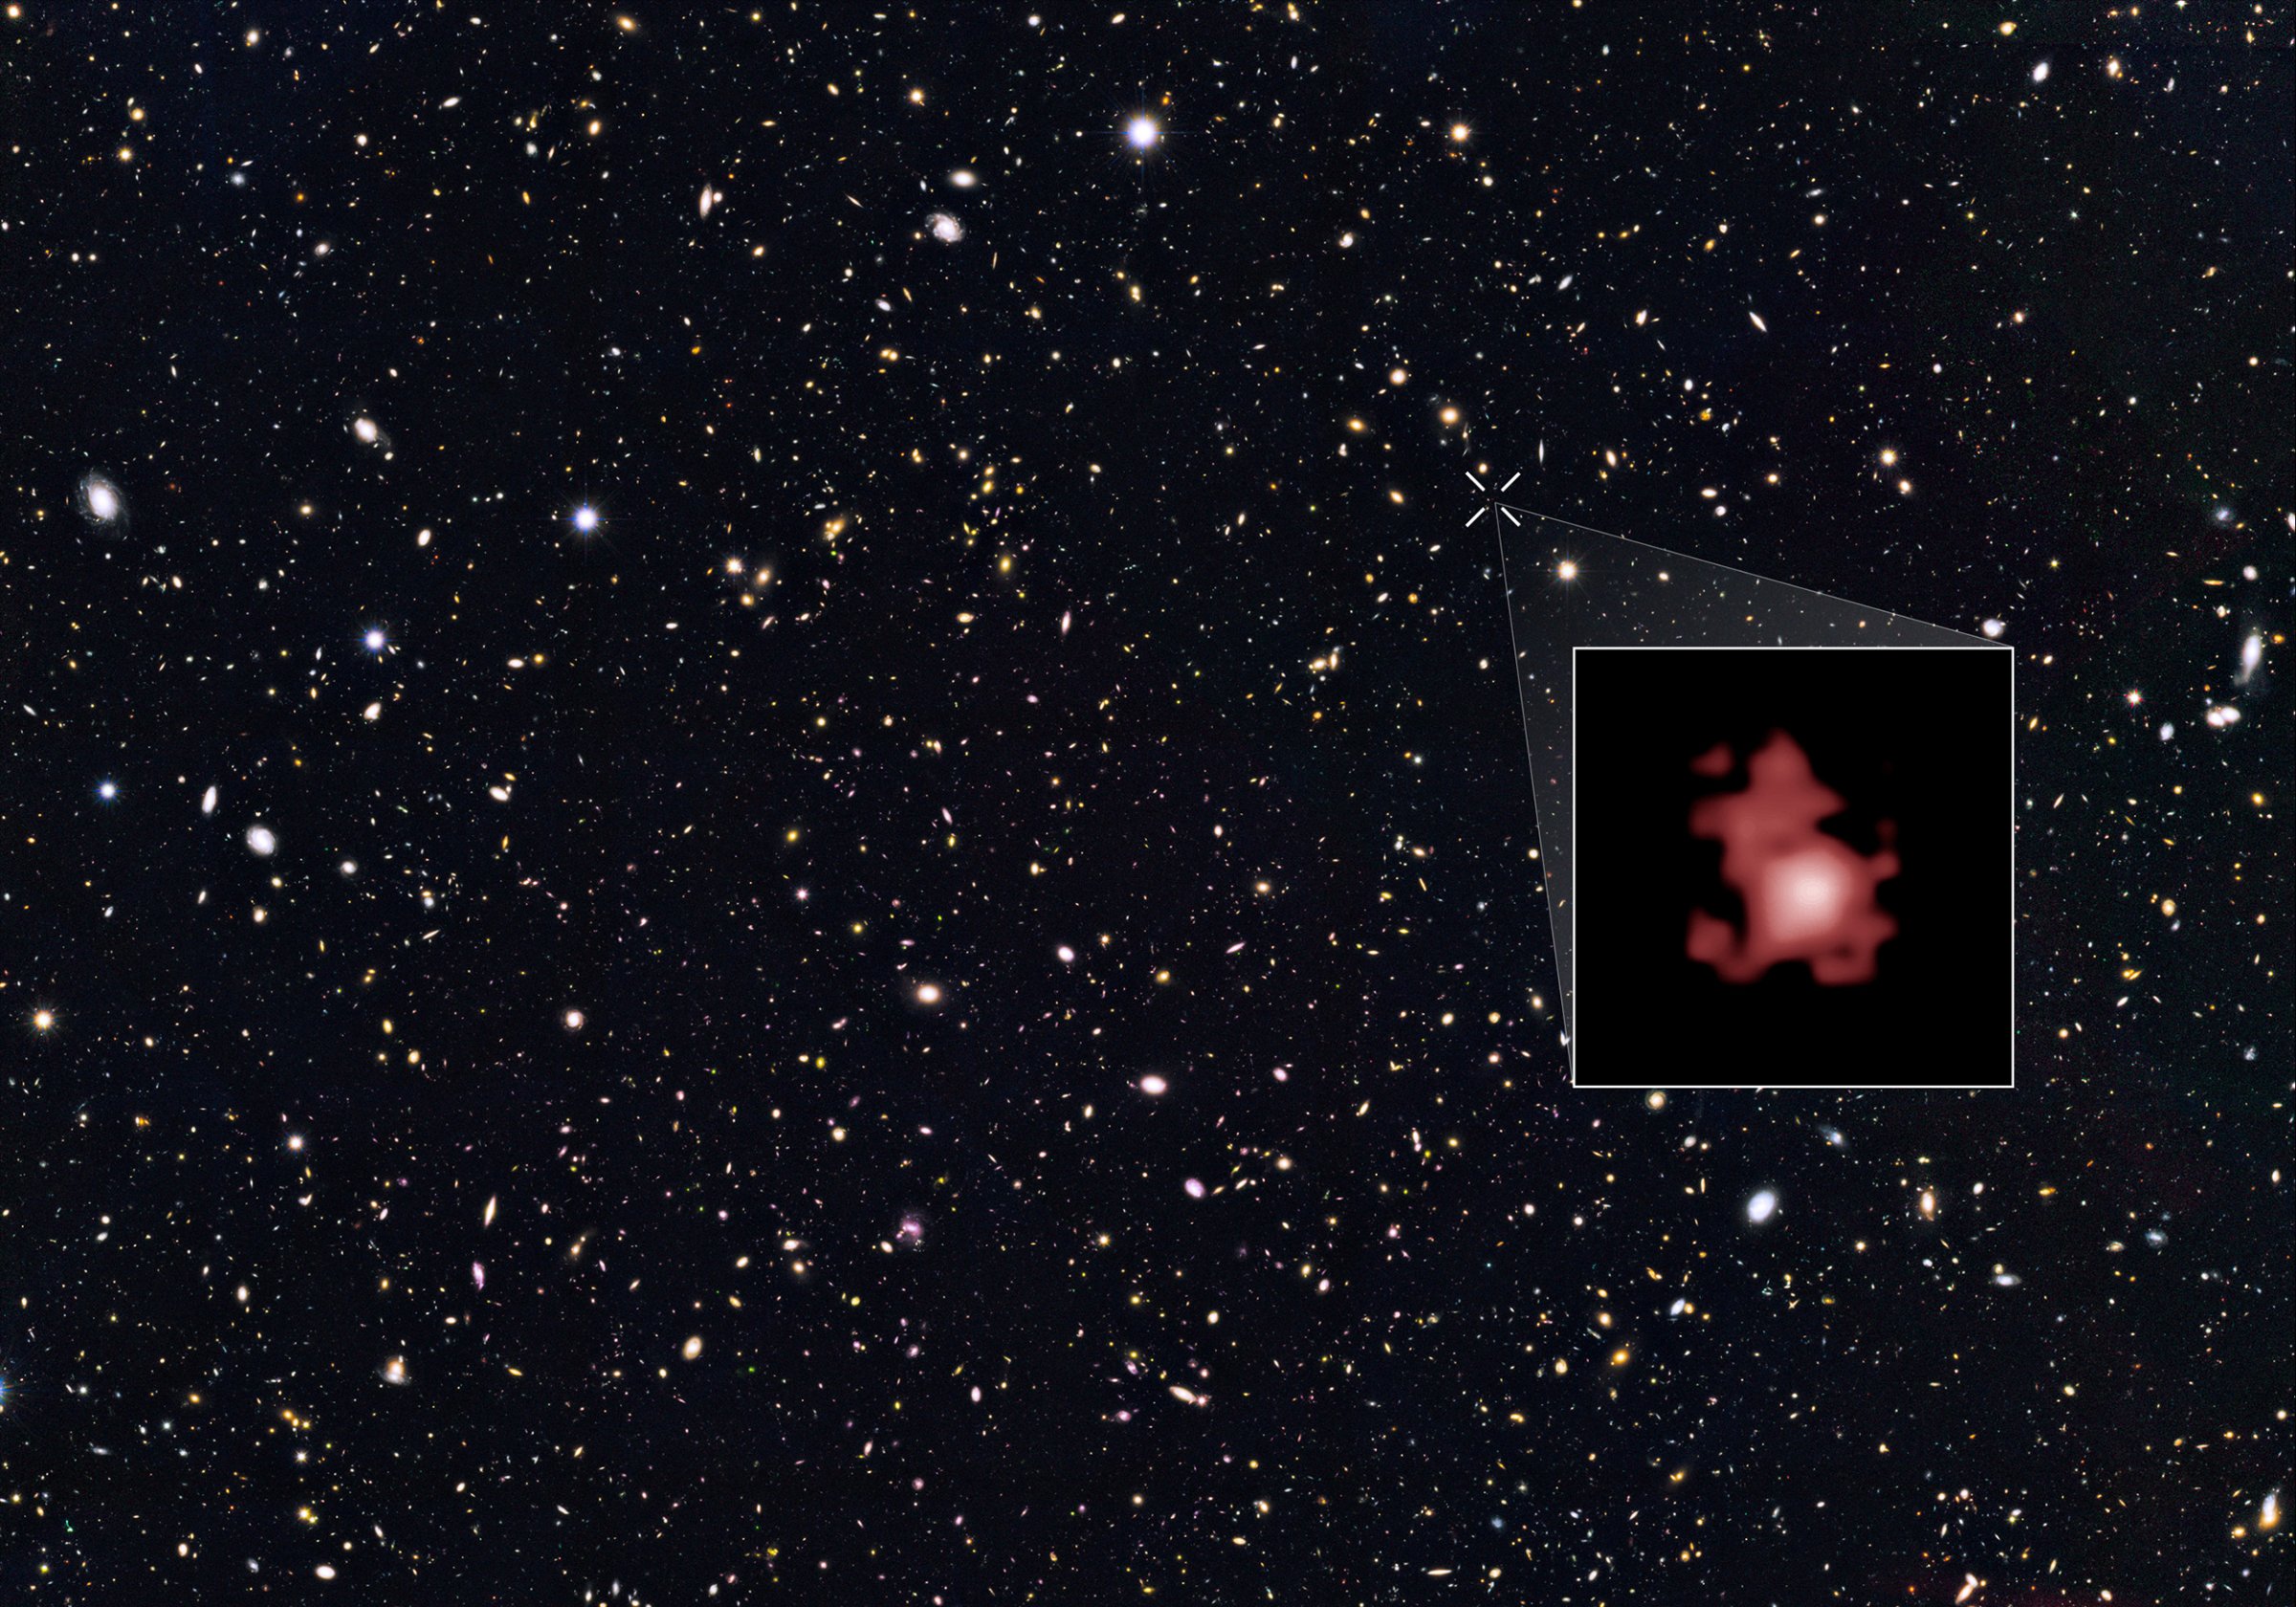 This image shows the position of the most distant galaxy discovered so far within a deep sky Hubble Space Telescope survey called GOODS North (Great Observatories Origins Deep Survey North). The remote galaxy GN-z11, shown in the inset, existed only 400 million years after the Big Bang, when the Universe was only 3 percent of its current age. It belongs to the first generation of galaxies in the Universe and its discovery provides new insights into the very early Universe.